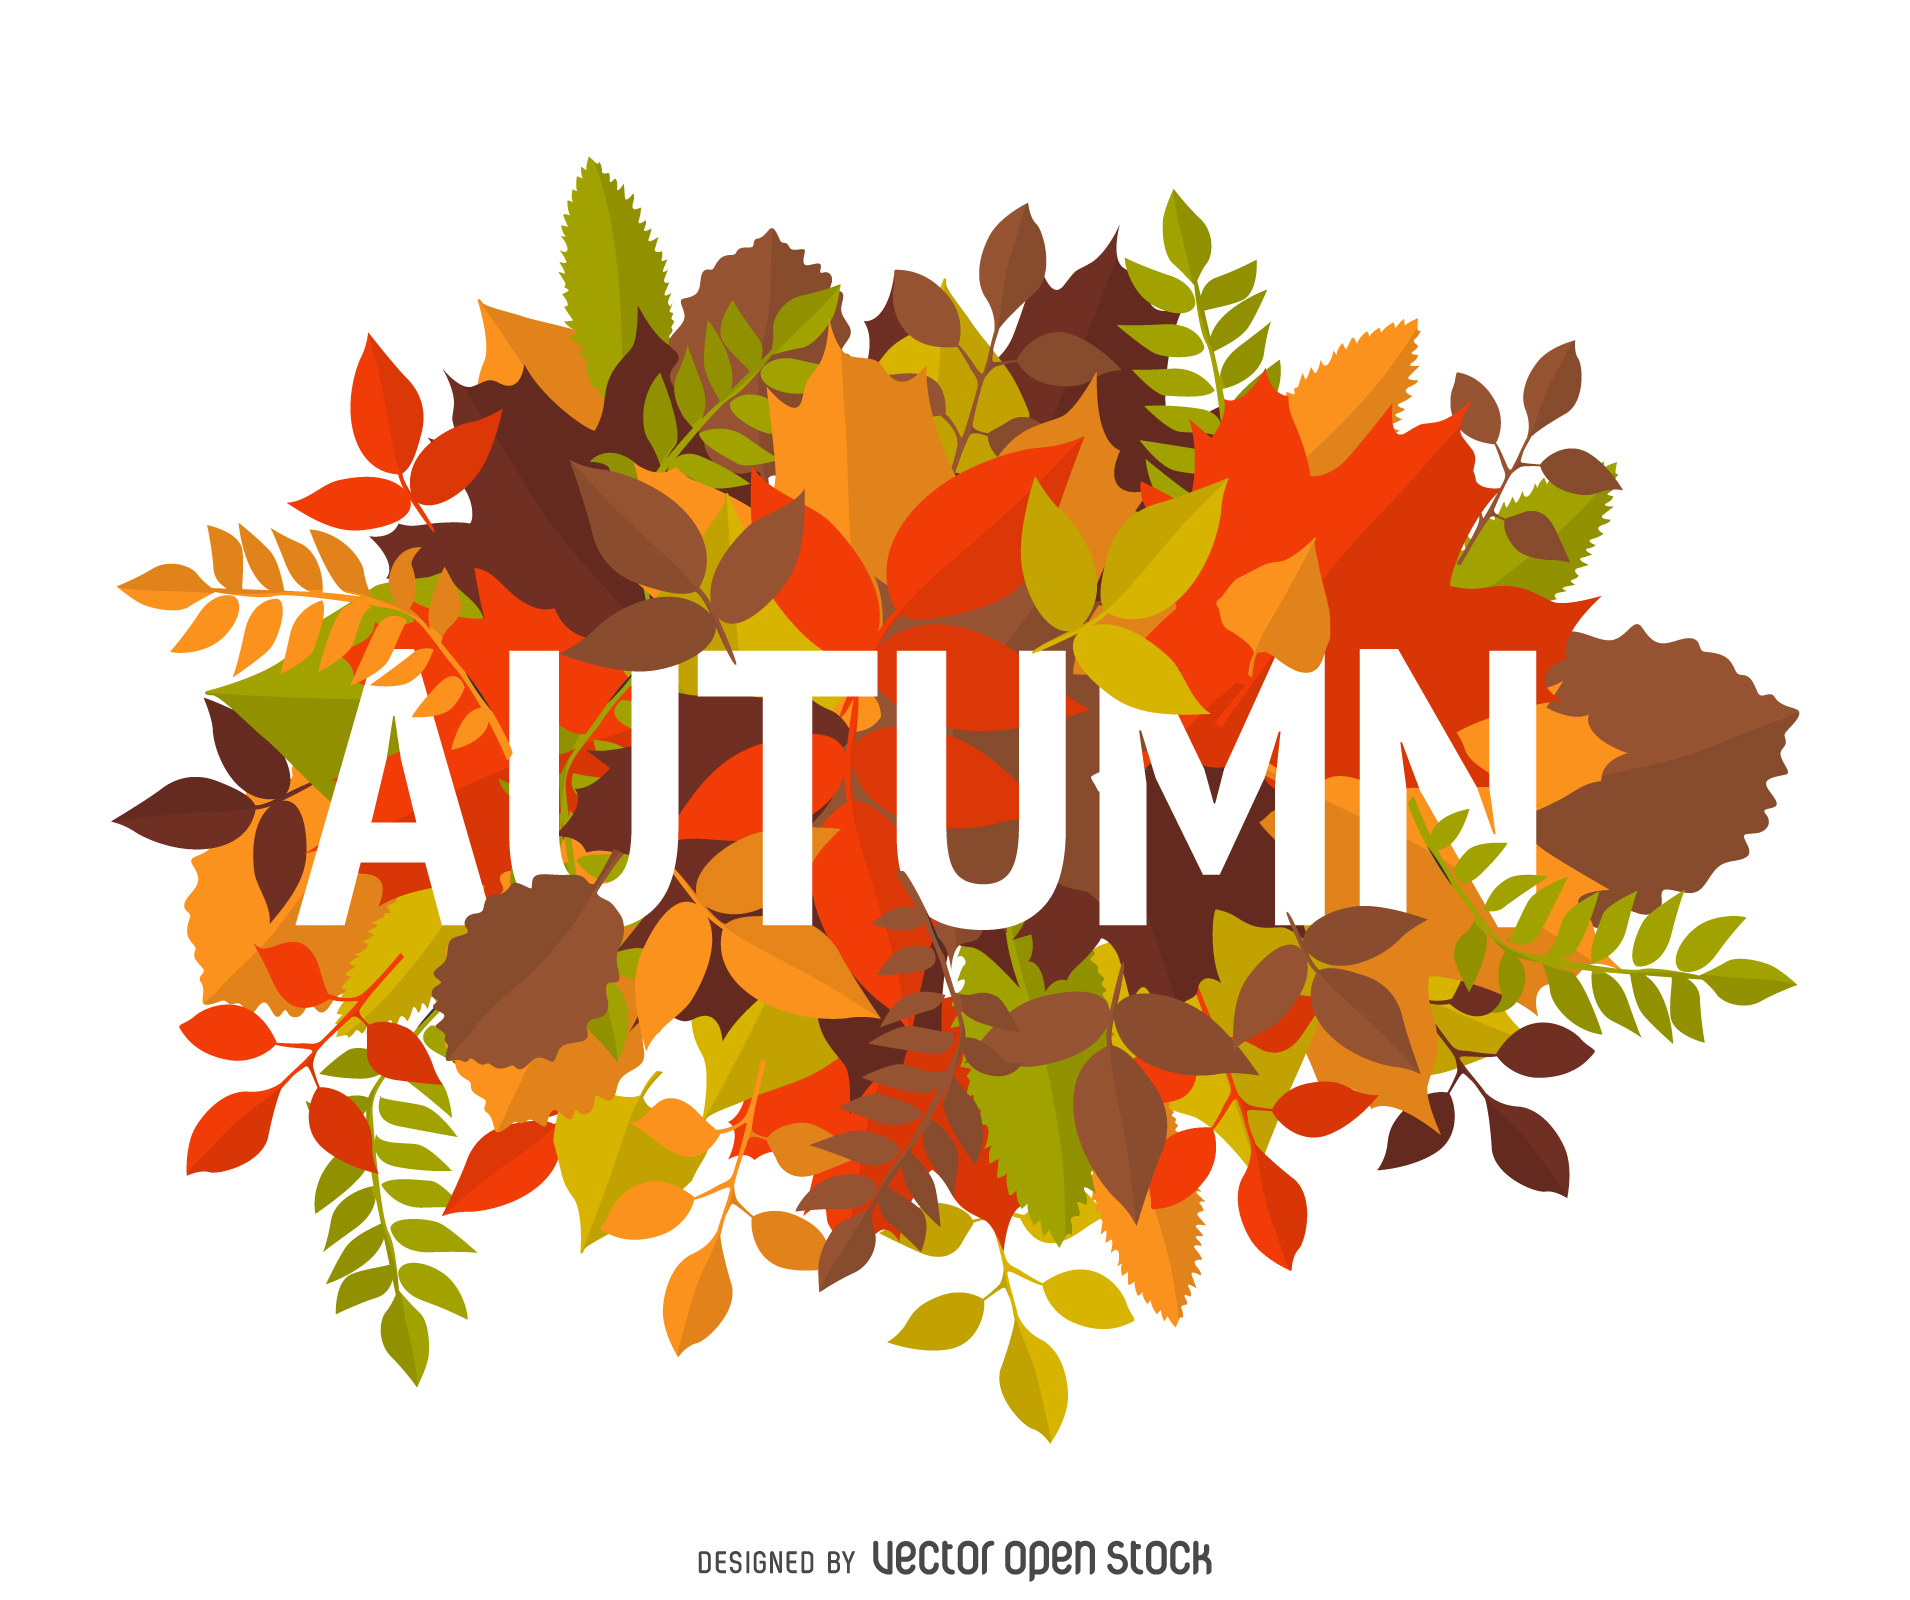 Autumn sign with leaves - Vector download